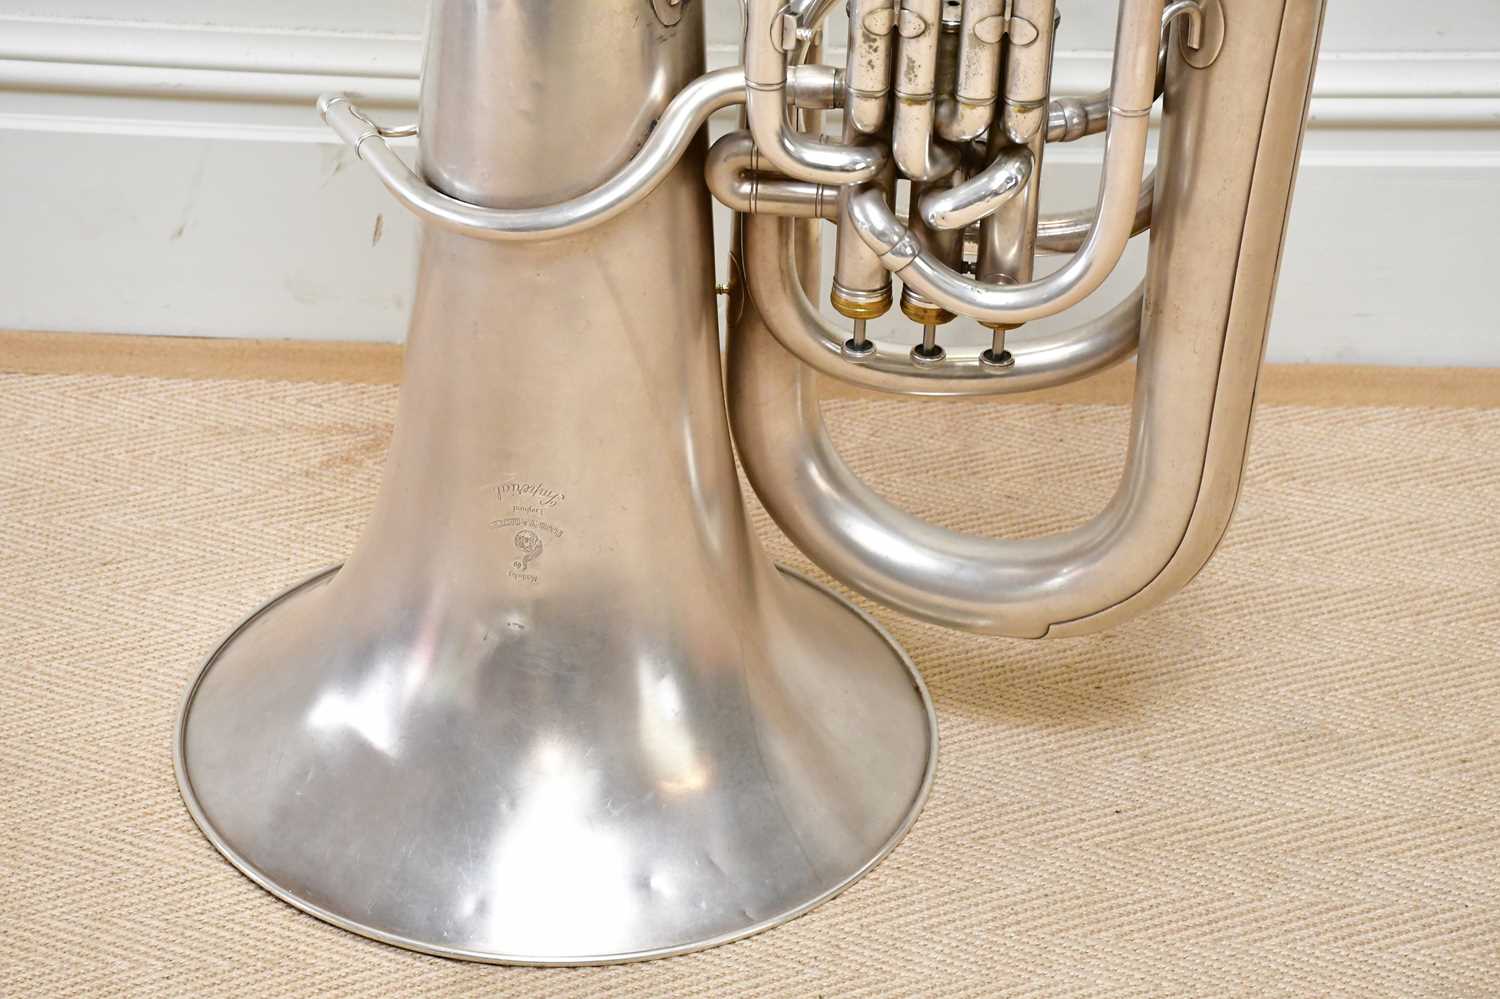 BOOSEY & HAWKES; an Imperial tuba, numbered 584759, with two mouth pieces, stand and accessories. - Image 4 of 9